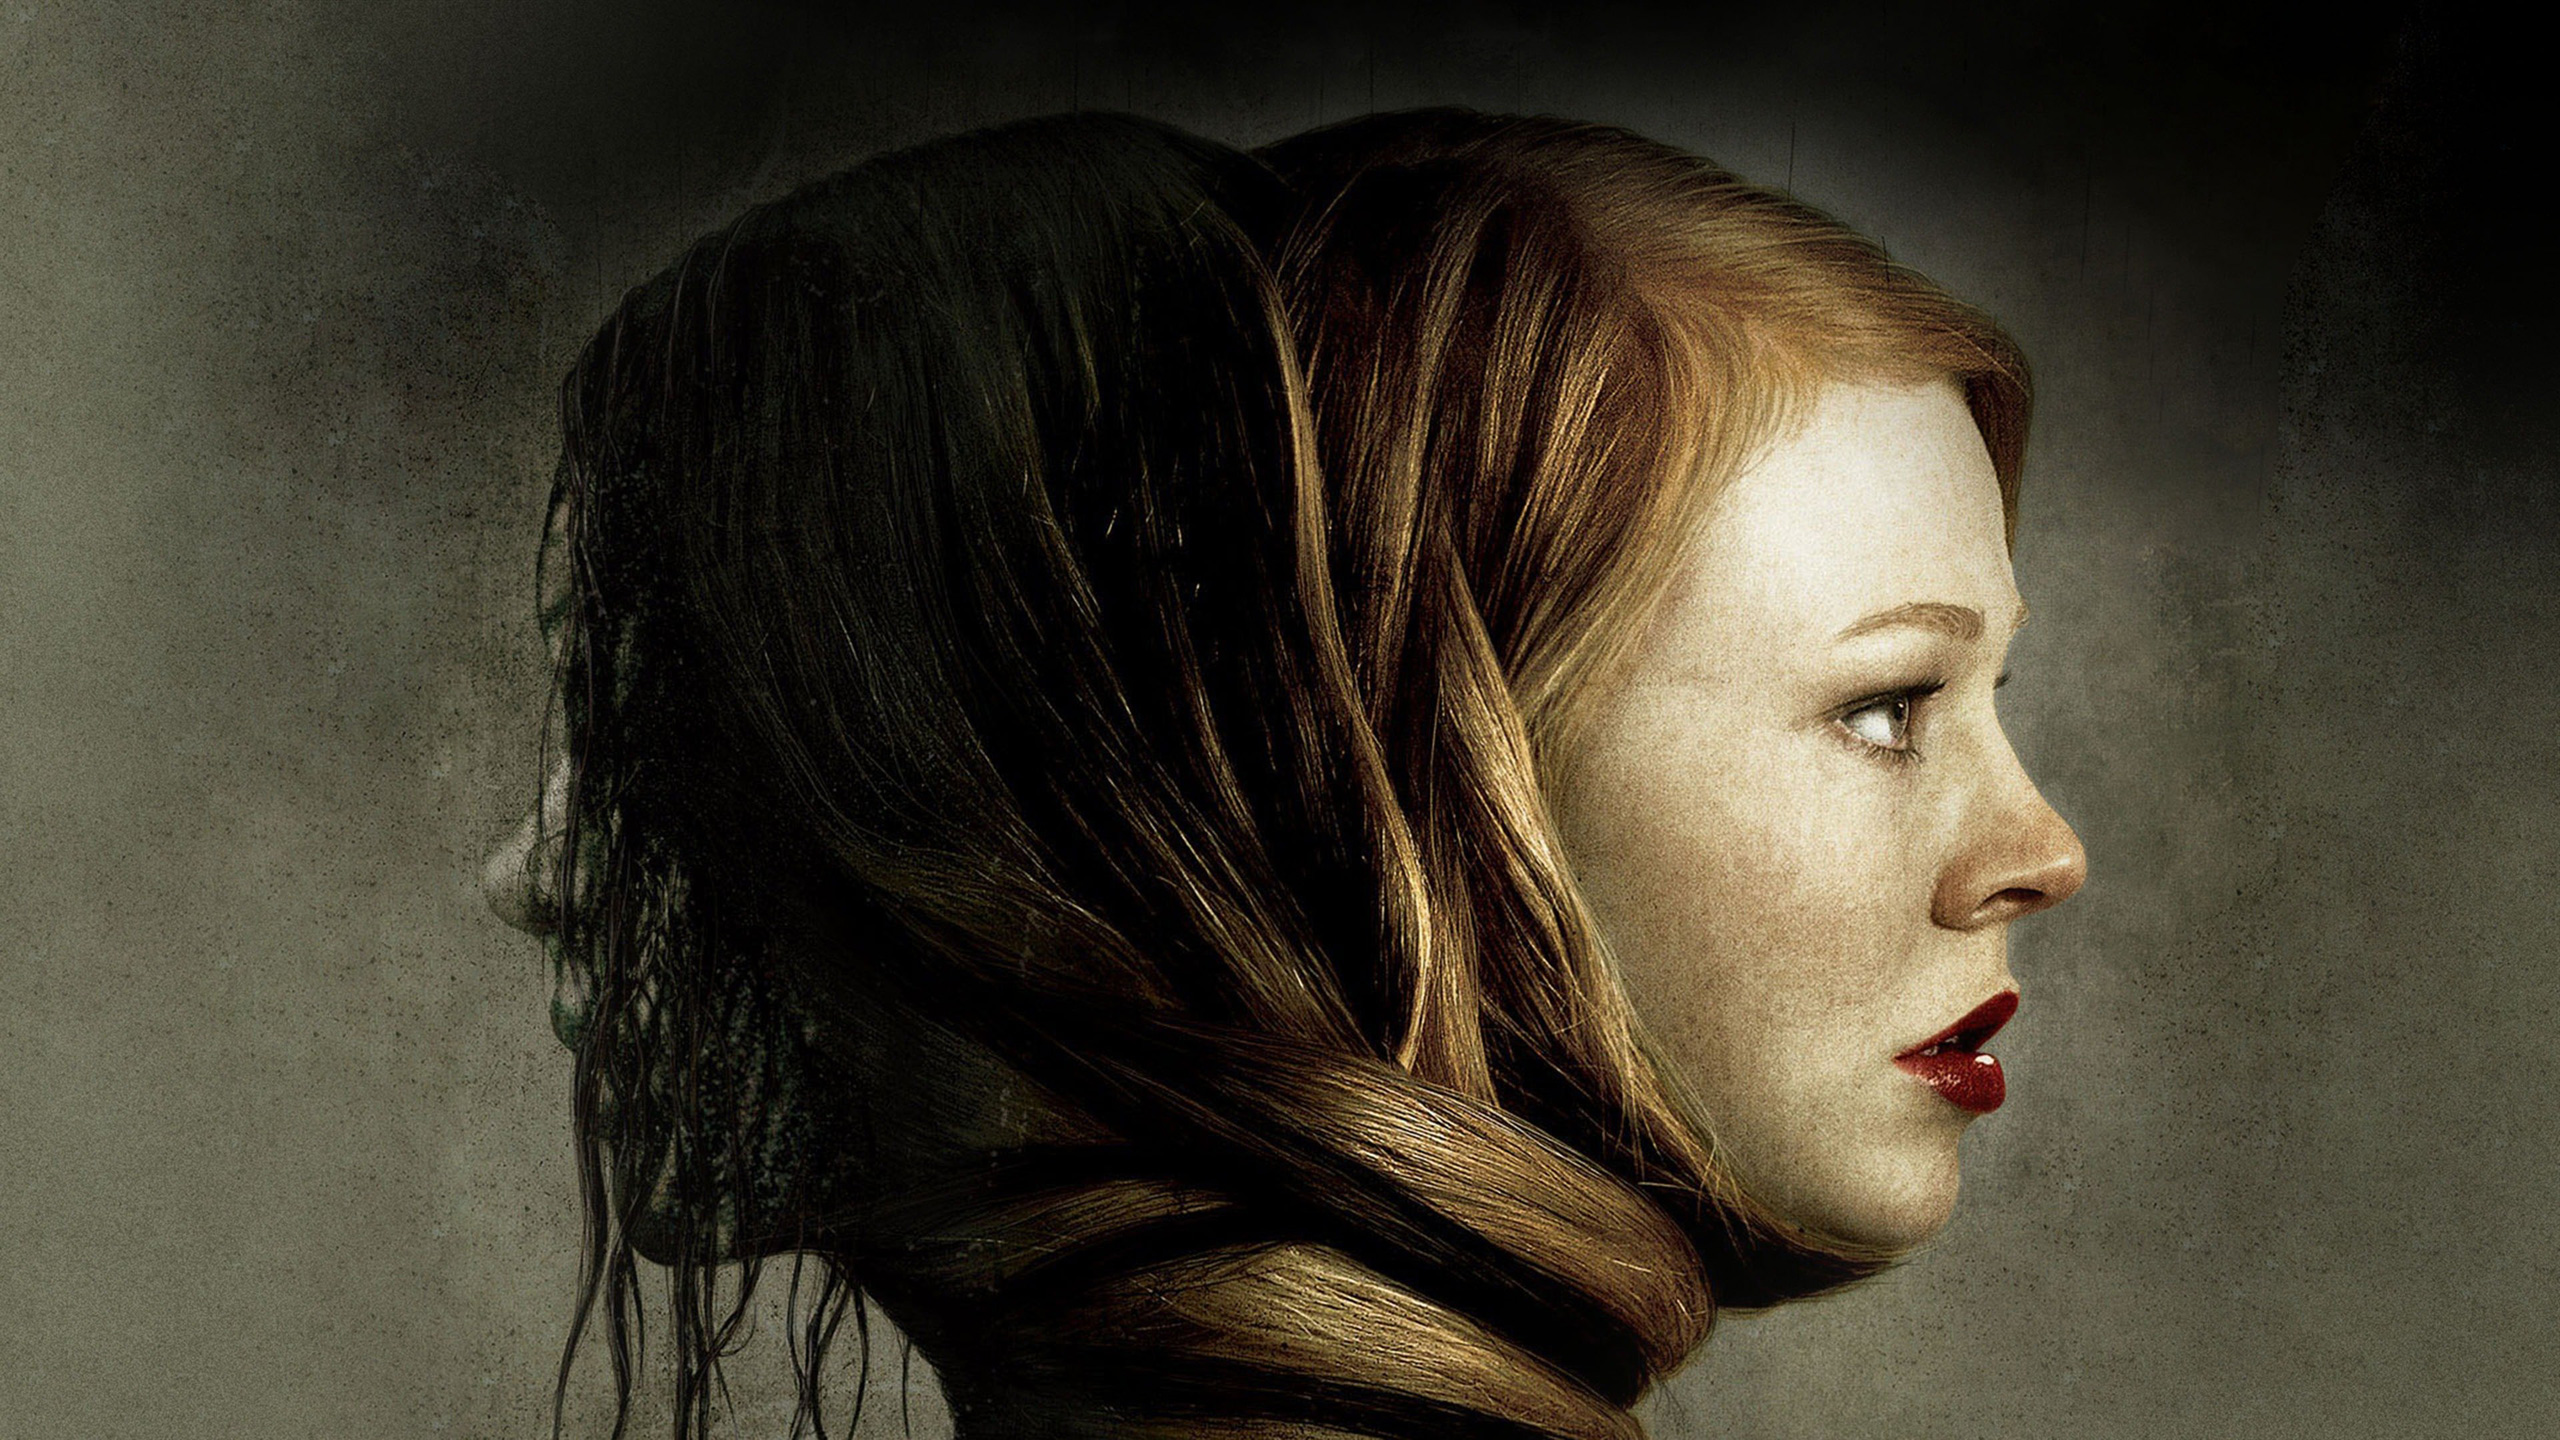 Jessabelle (Φαντάσματα) Review